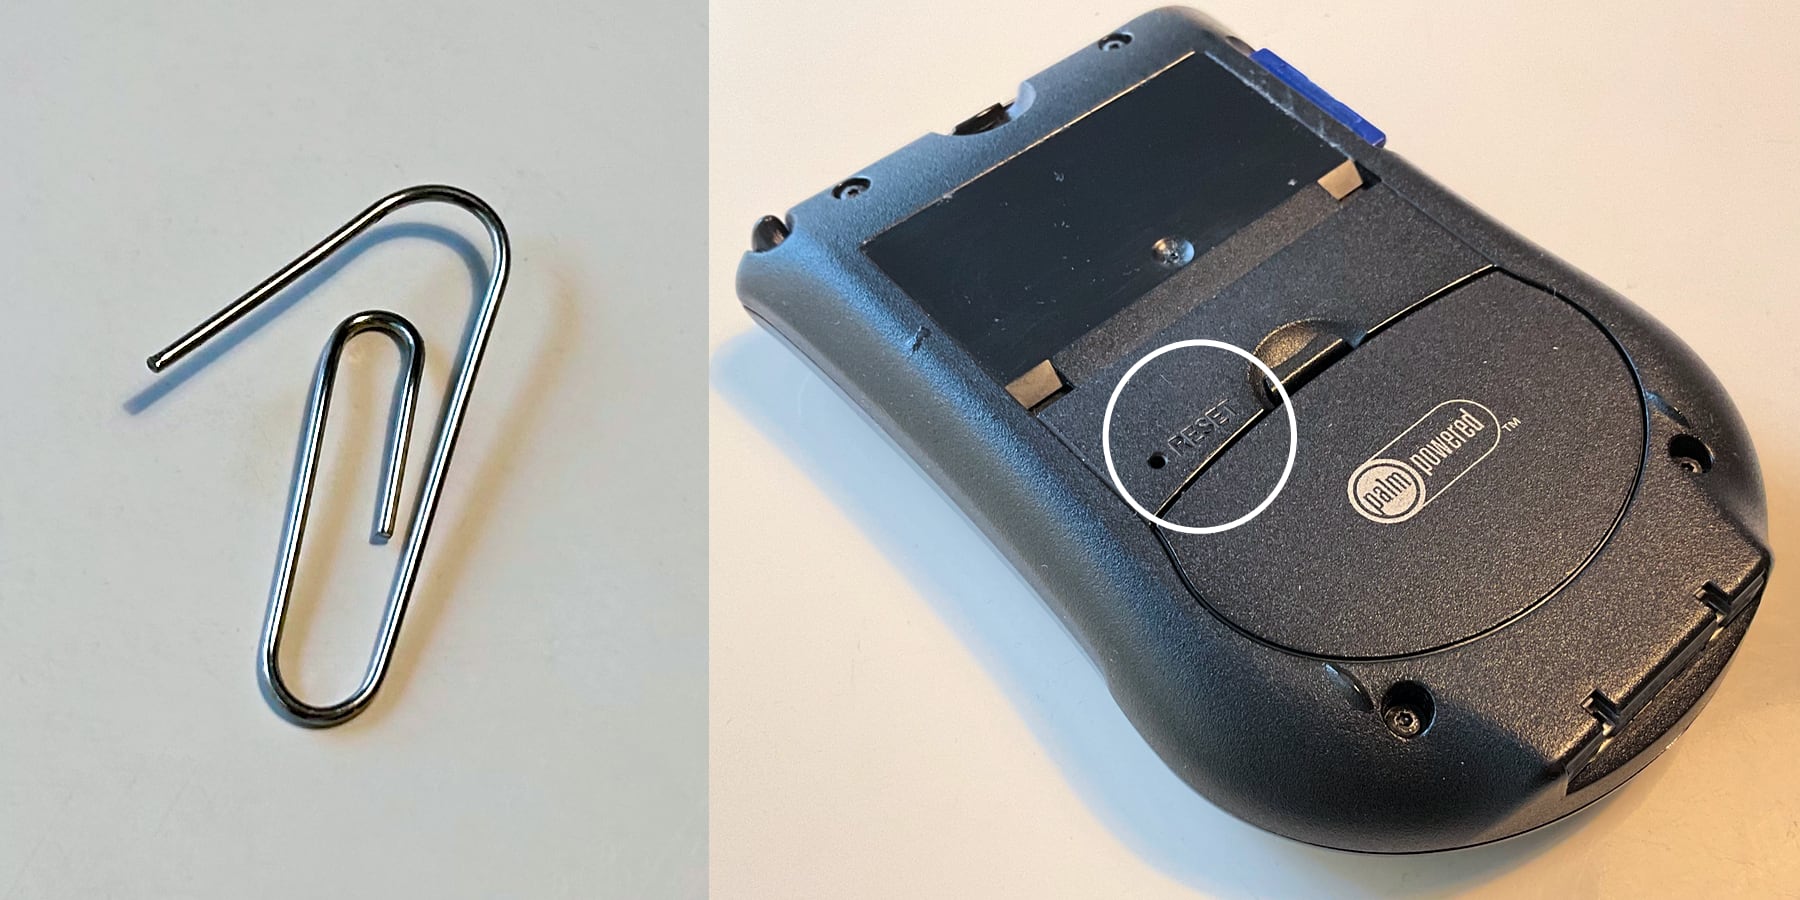 The paper clip allows you to reset the Palm device.